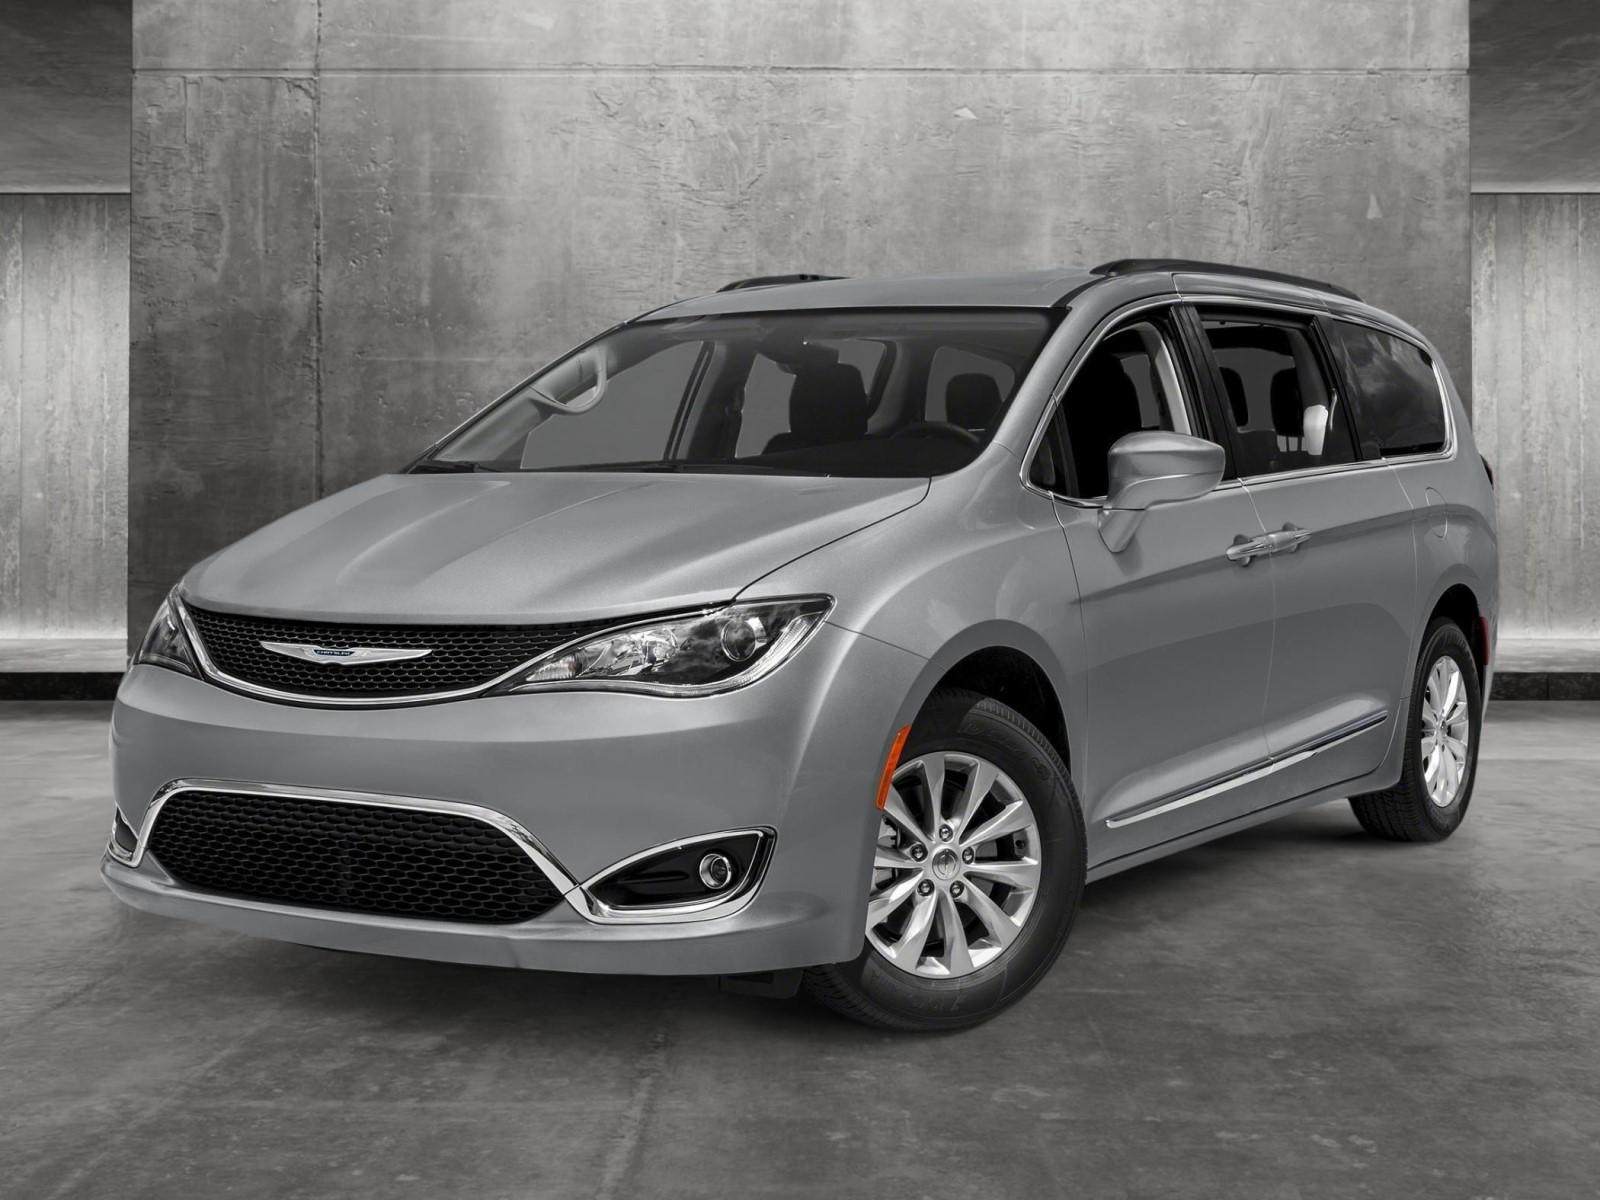 2018 Chrysler Pacifica Vehicle Photo in Towson, MD 21204